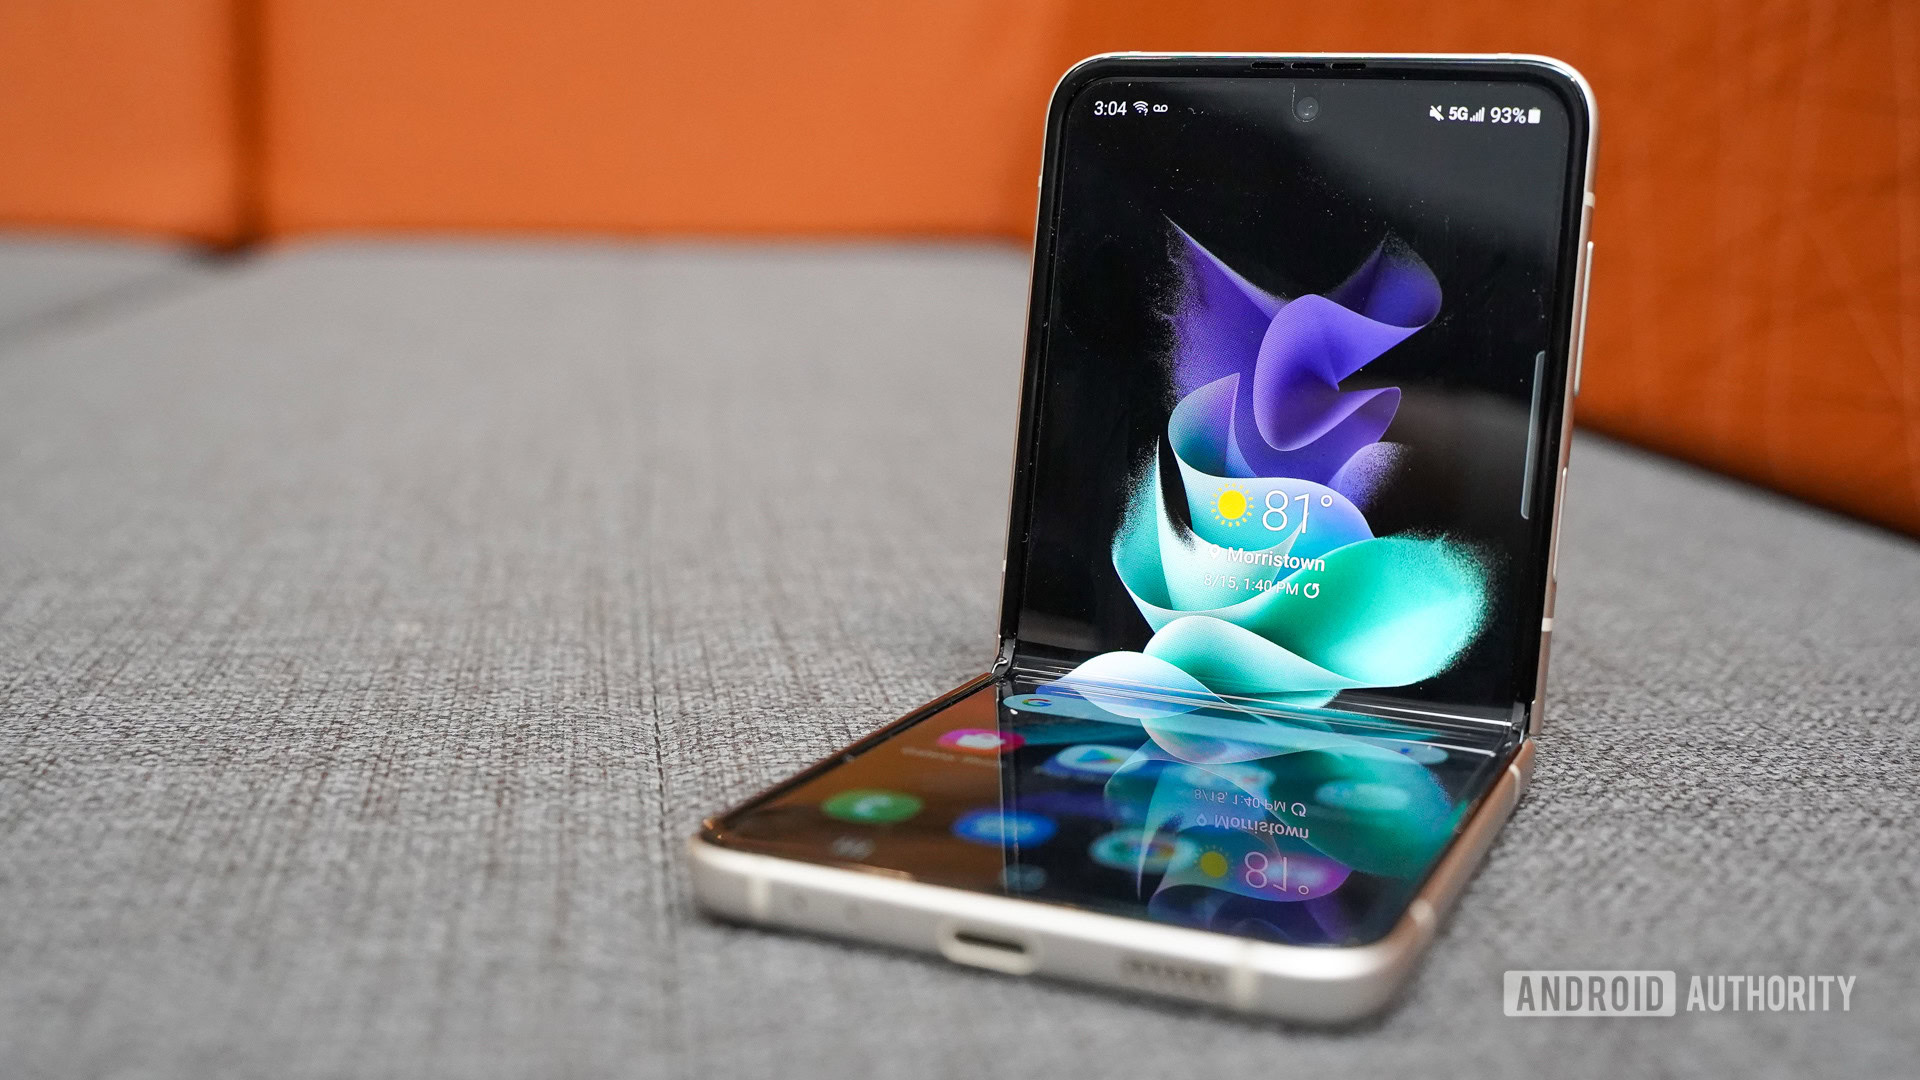 Samsung Galaxy Z Flip 3 review: A stunning, accessible foldable phone -  SamMobile